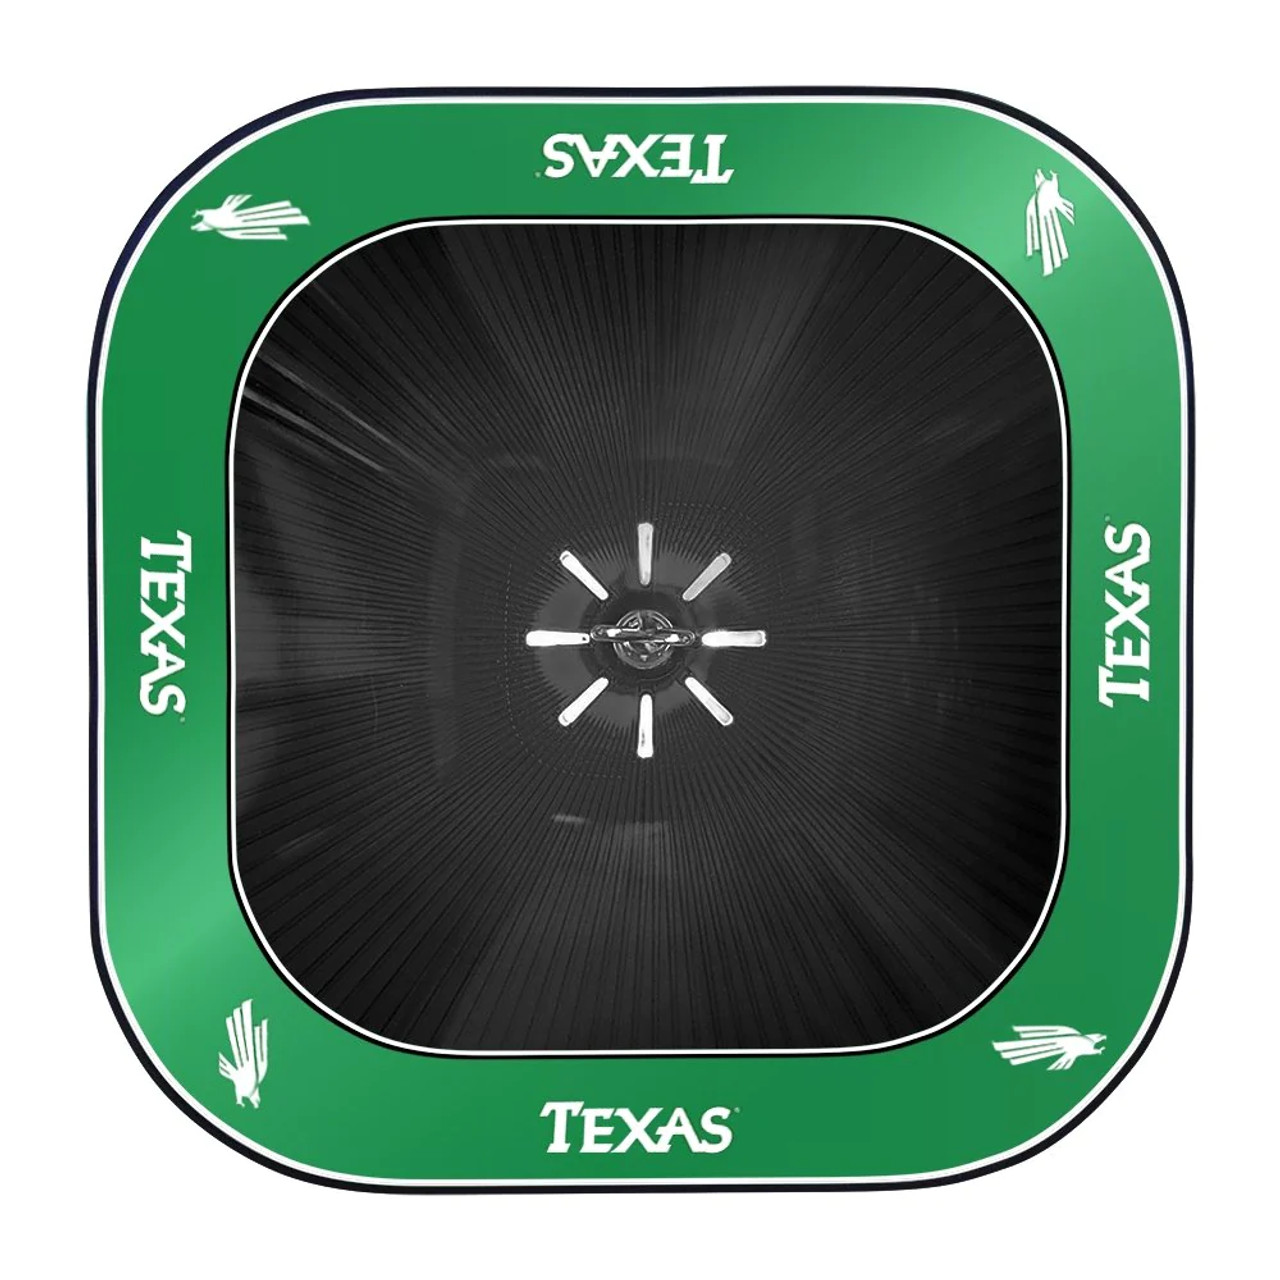 North, Texas, Mean, Green, Game, Room, Cave, Table, Light, Lamp,NCNOTX-410-01, The Fan-Brand, 737547360242